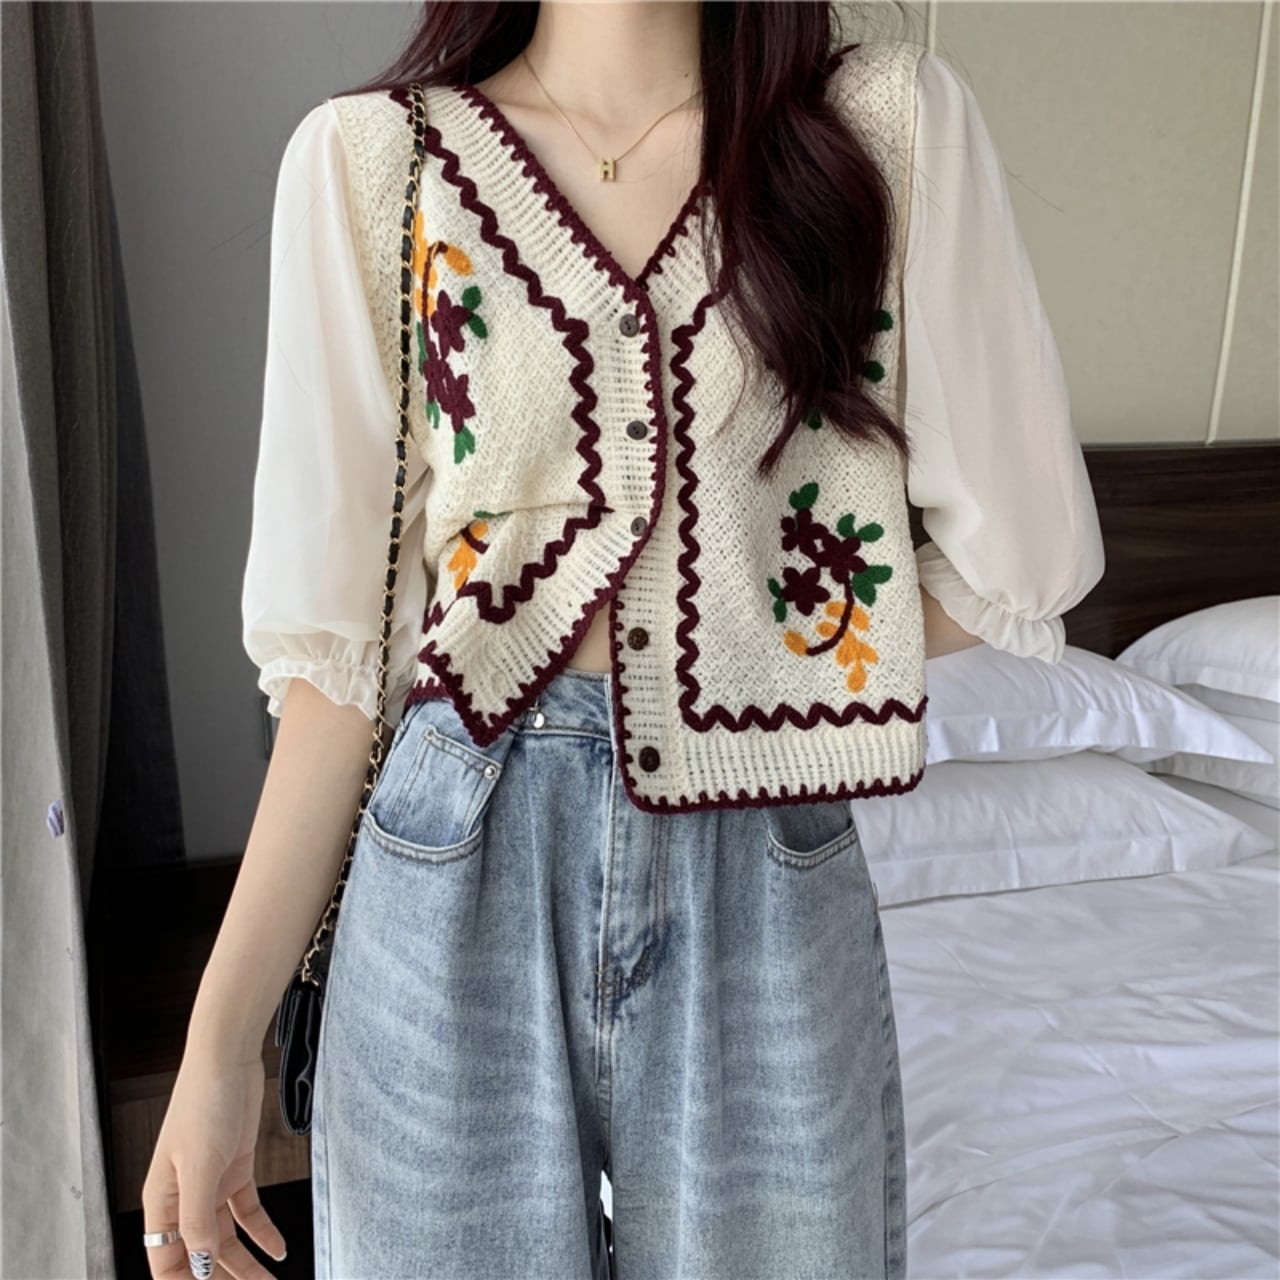 Crochet Floral Embroidery Cardigan KRE1855